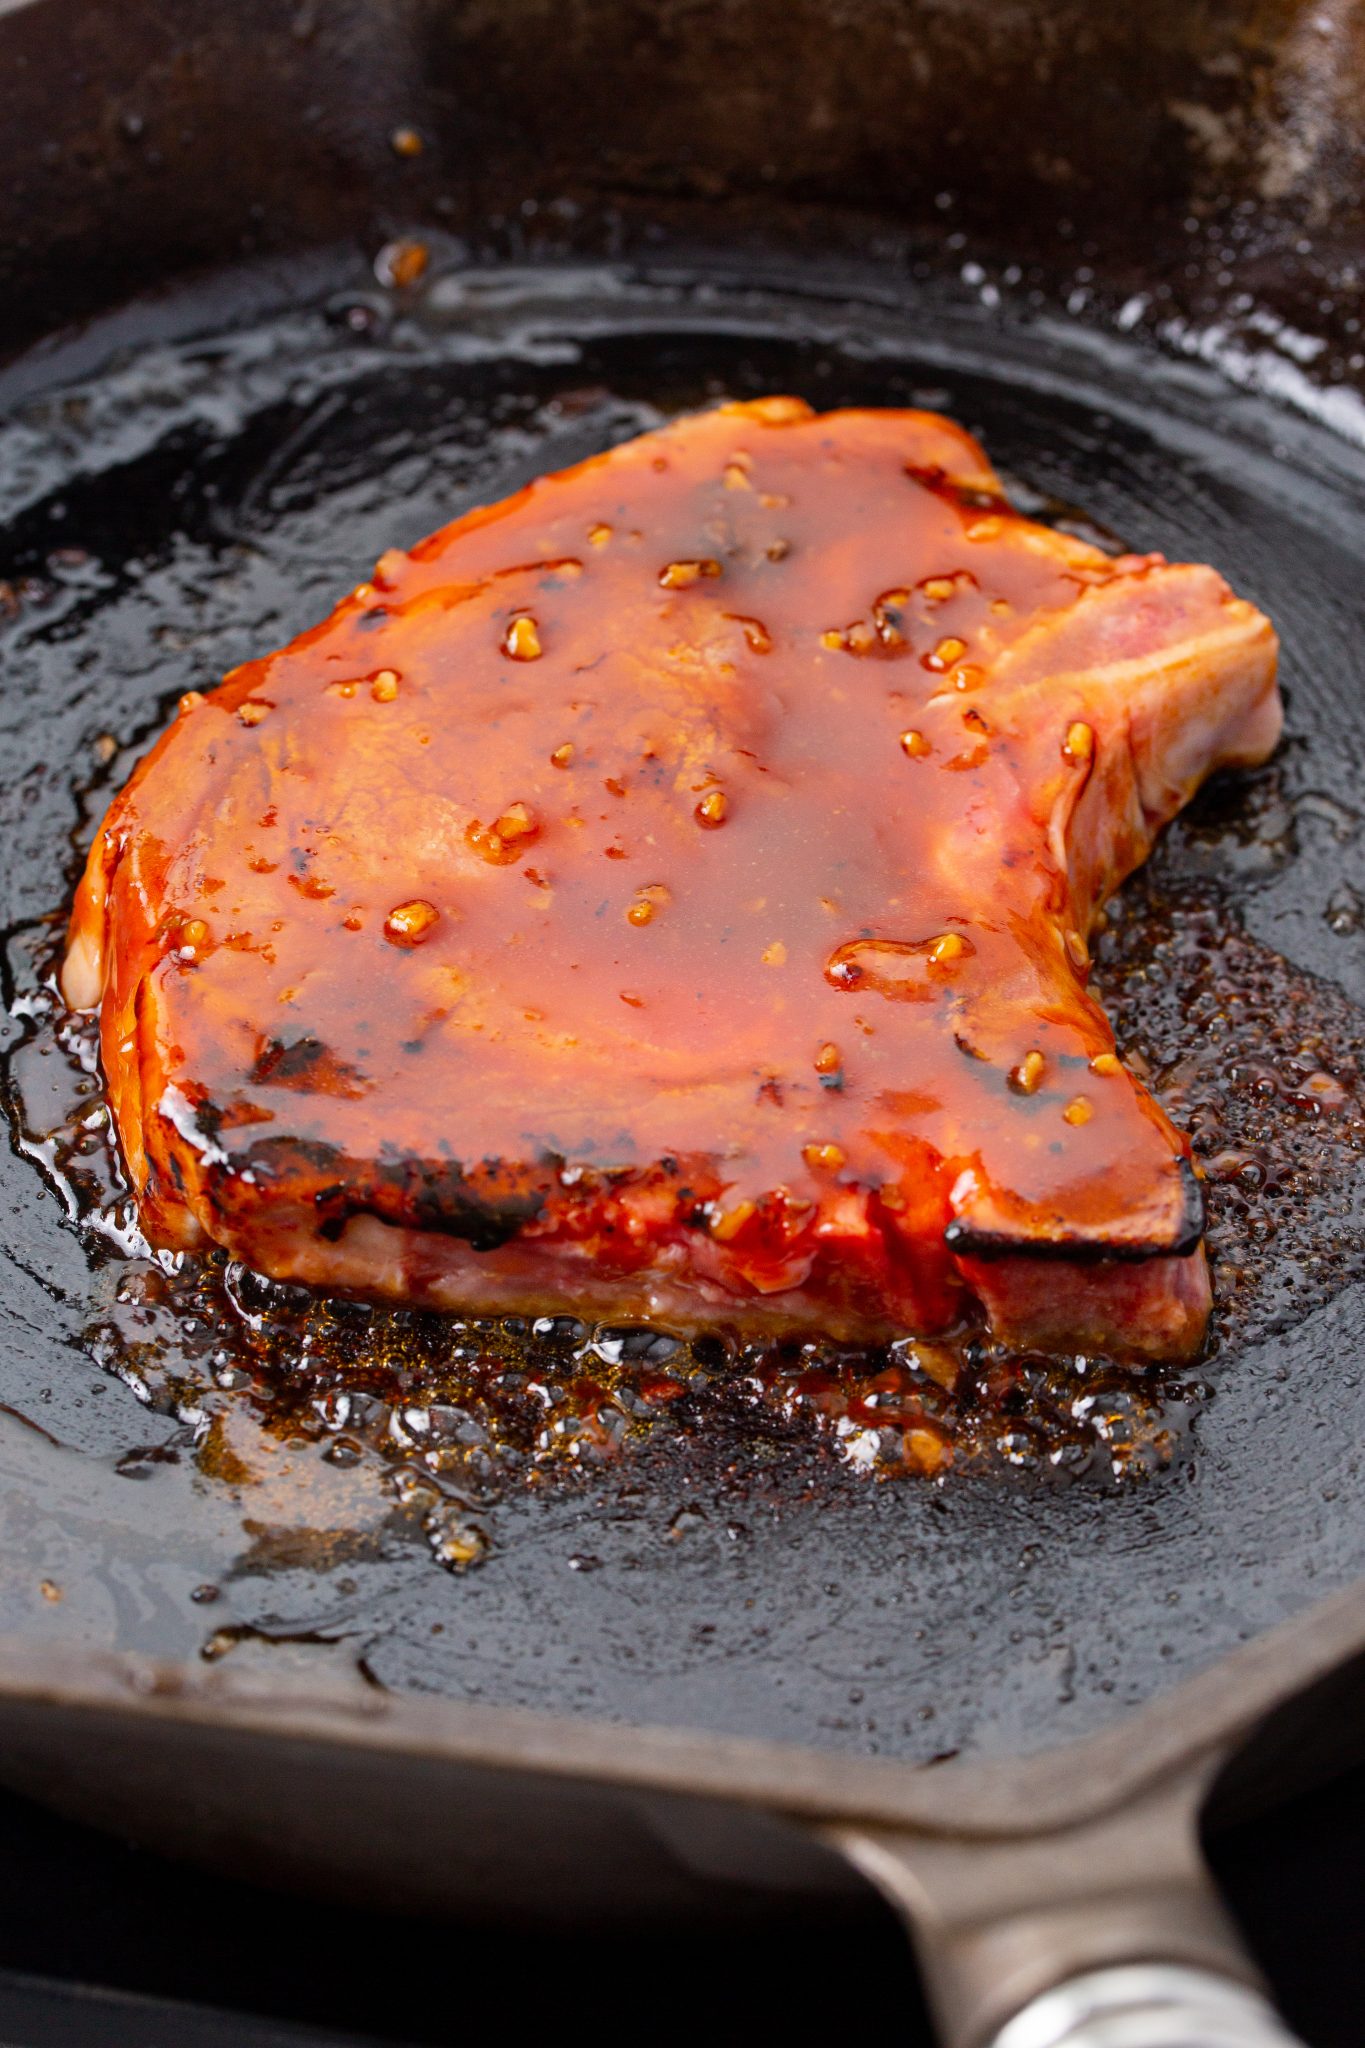 Asian style bone in pork chops searing in a cast iron skillet